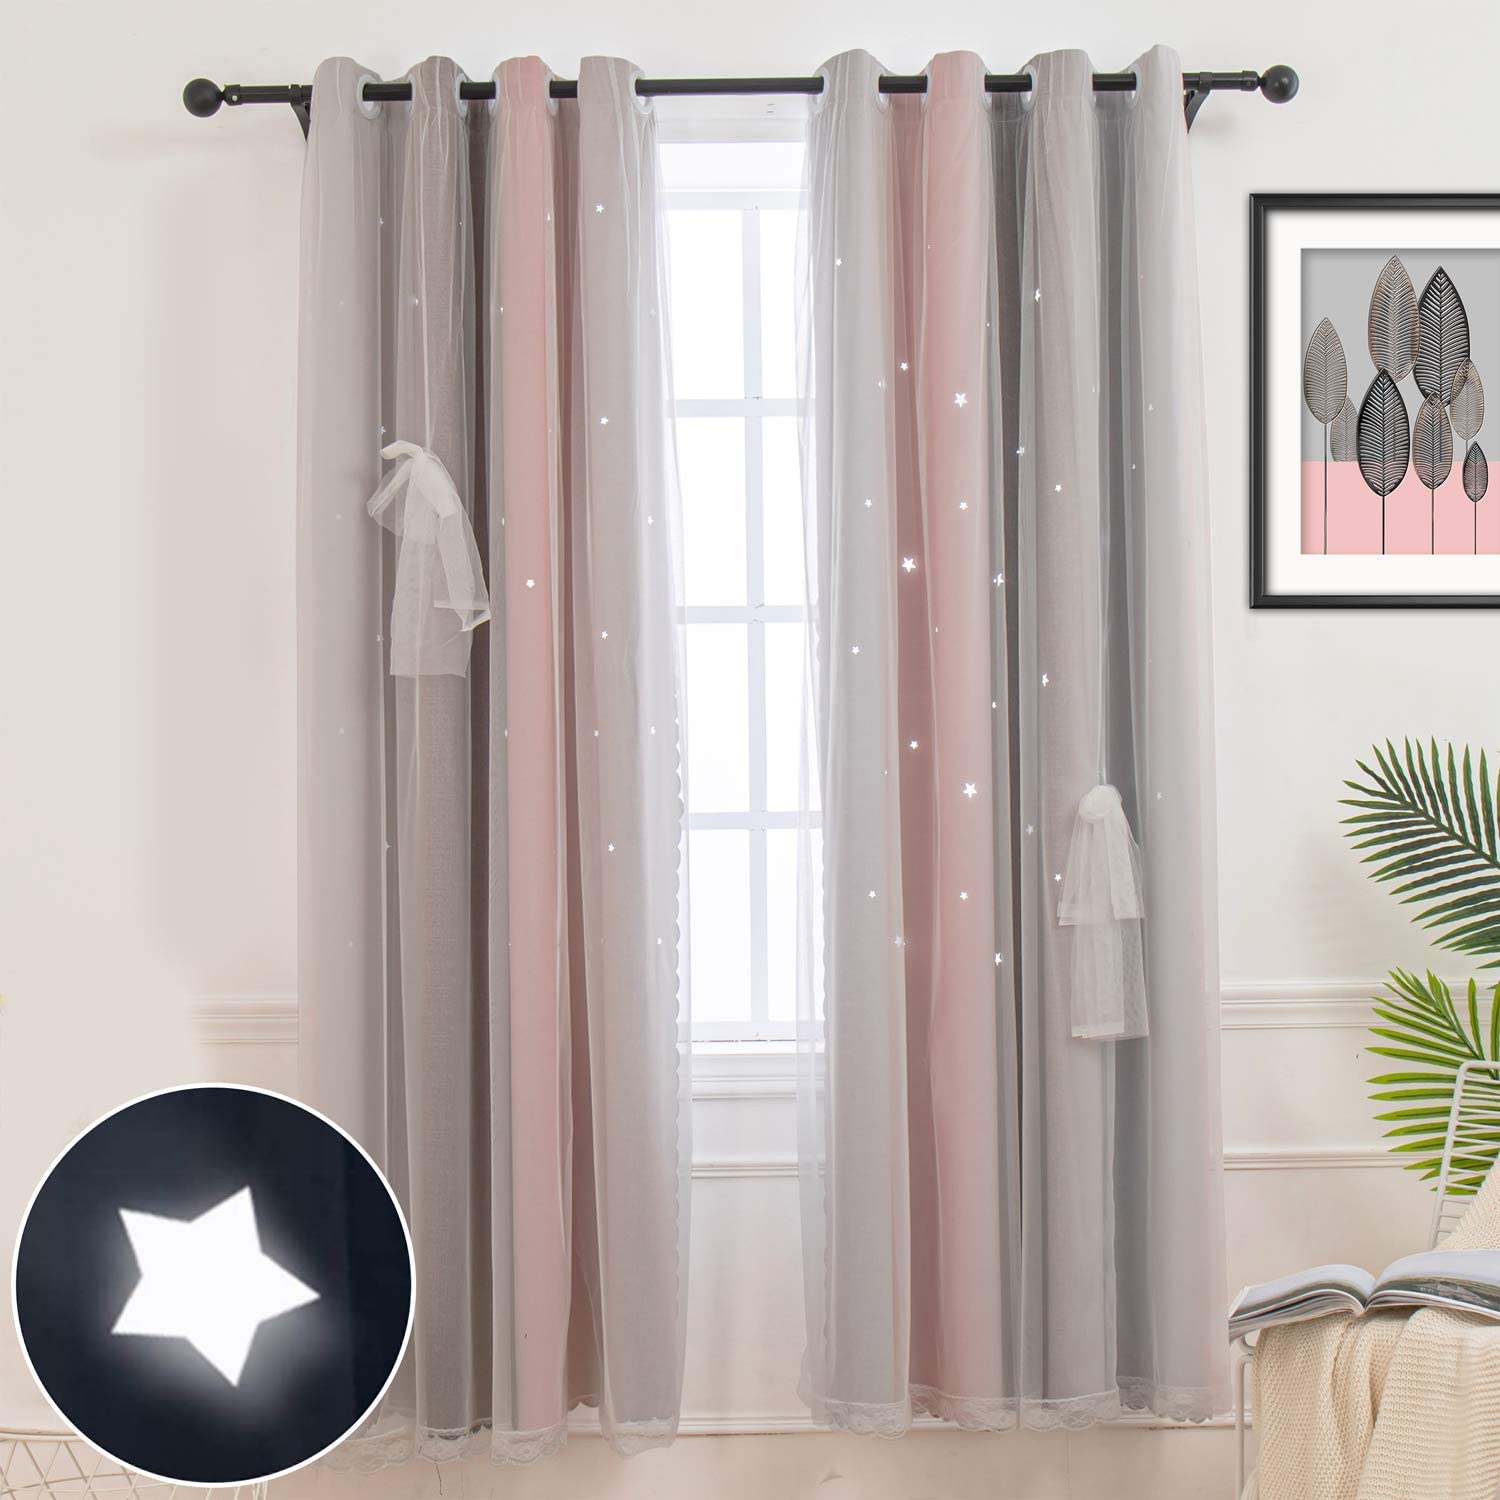 1 Panel star blackout curtains for bedroom living room curtain kids room curtain 